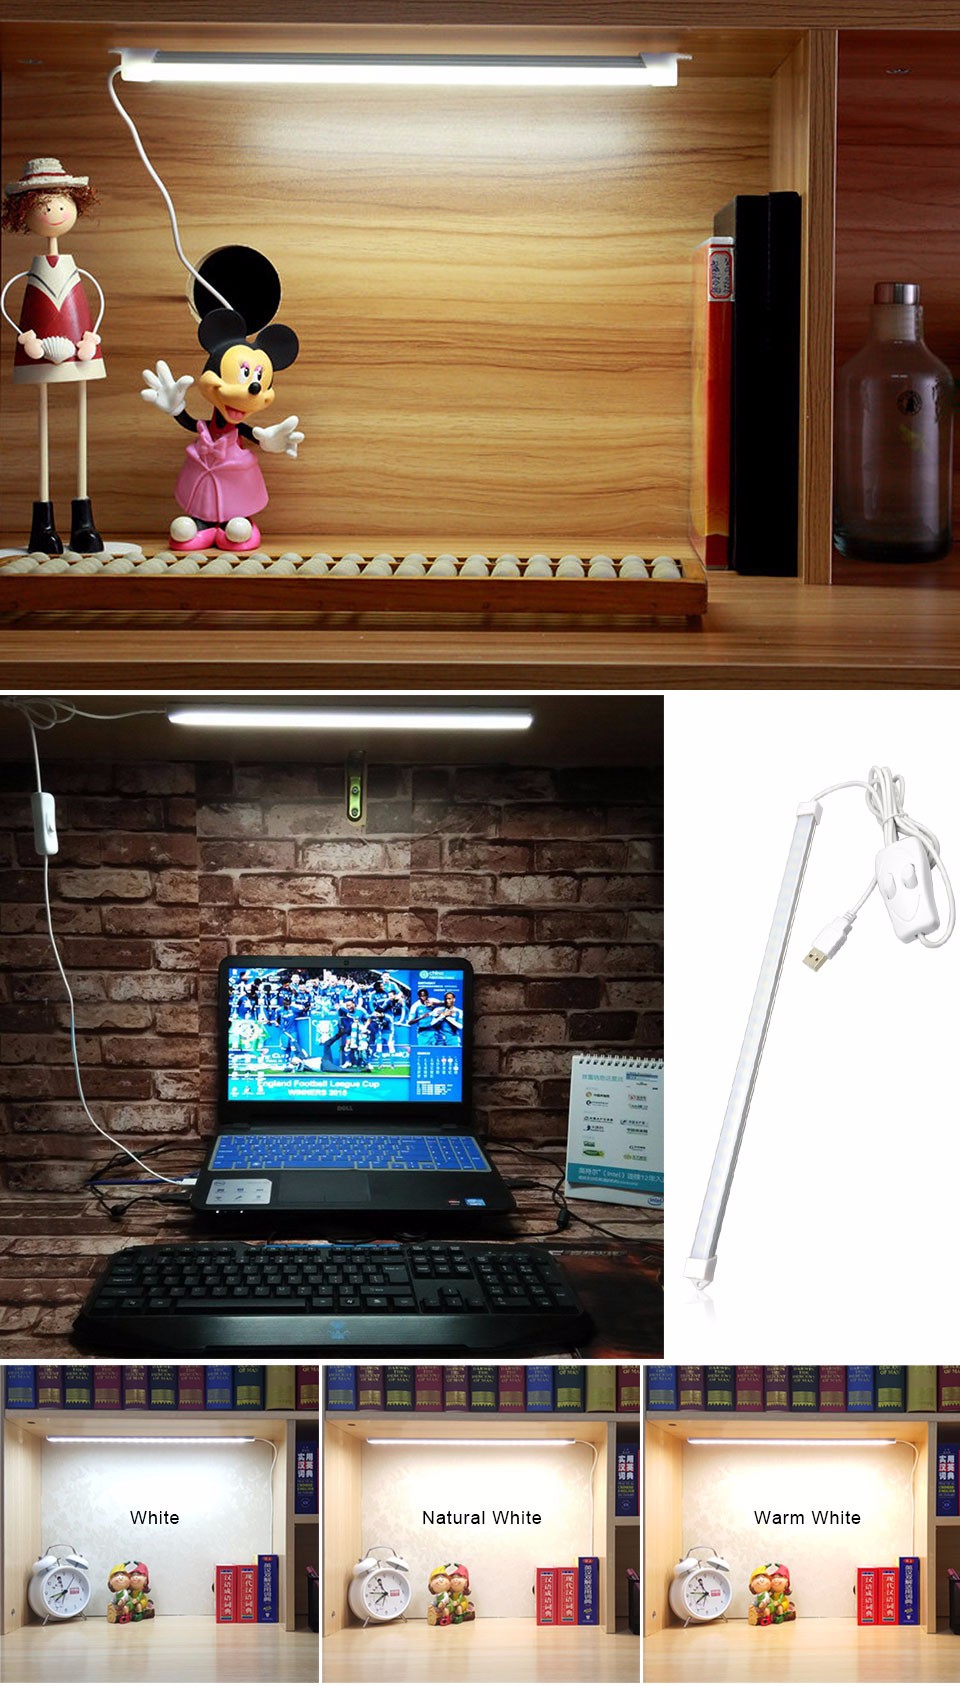 1Pcs Portable USB LED Bar lights Rigid Strip Night light DC5V 60LEDs 10W Desk lamp with Switch ON OFF For Reading Camping bulb